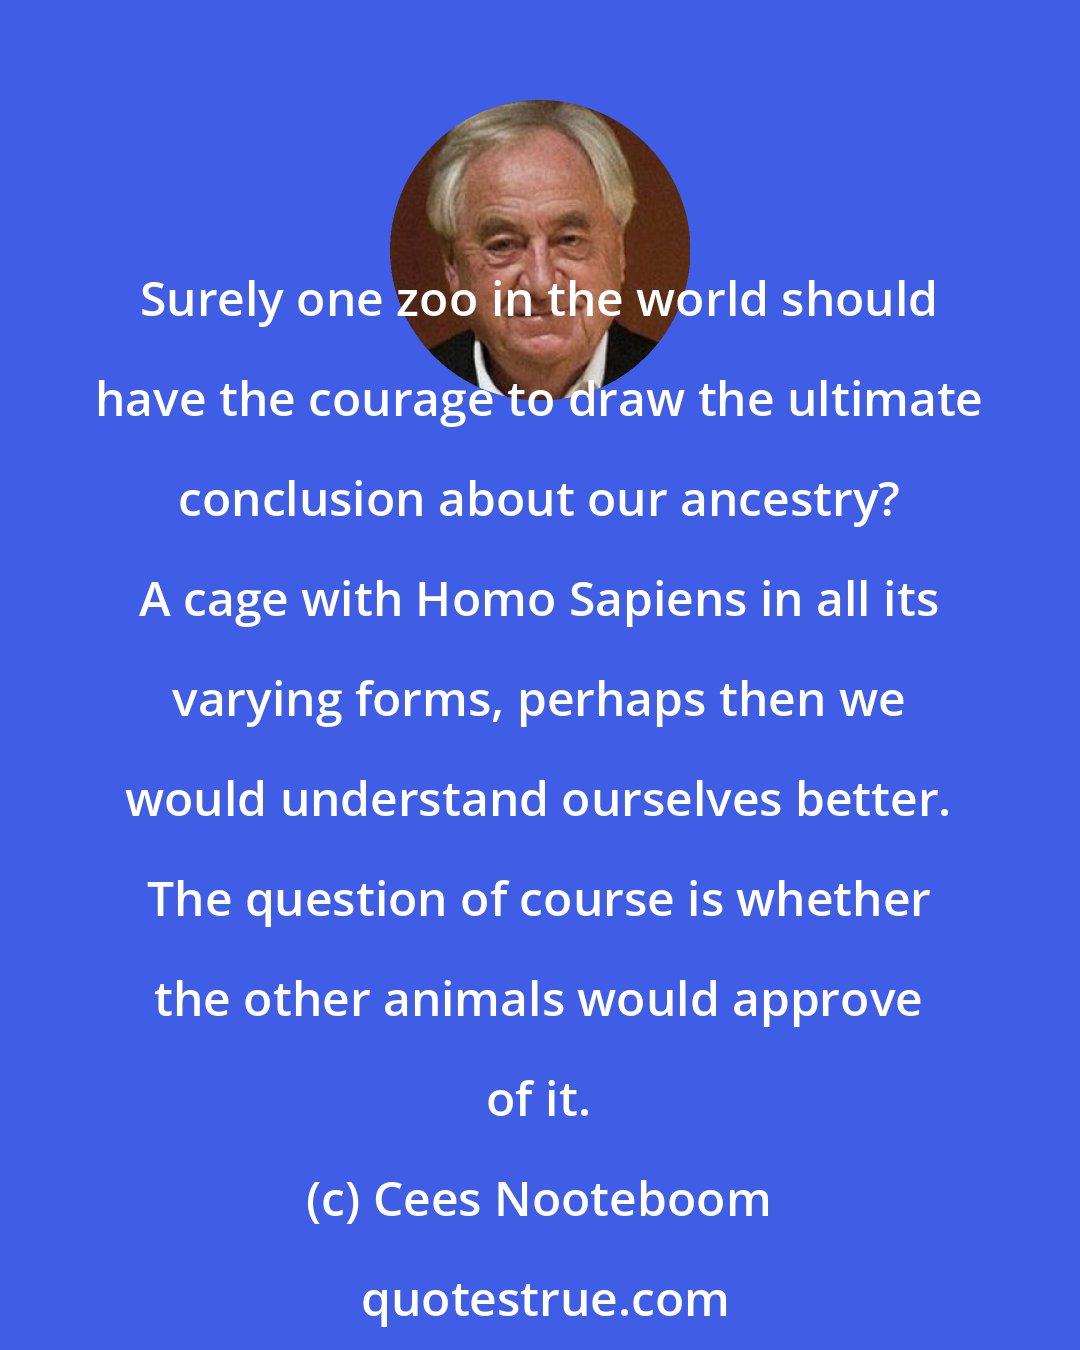 Cees Nooteboom: Surely one zoo in the world should have the courage to draw the ultimate conclusion about our ancestry? A cage with Homo Sapiens in all its varying forms, perhaps then we would understand ourselves better. The question of course is whether the other animals would approve of it.